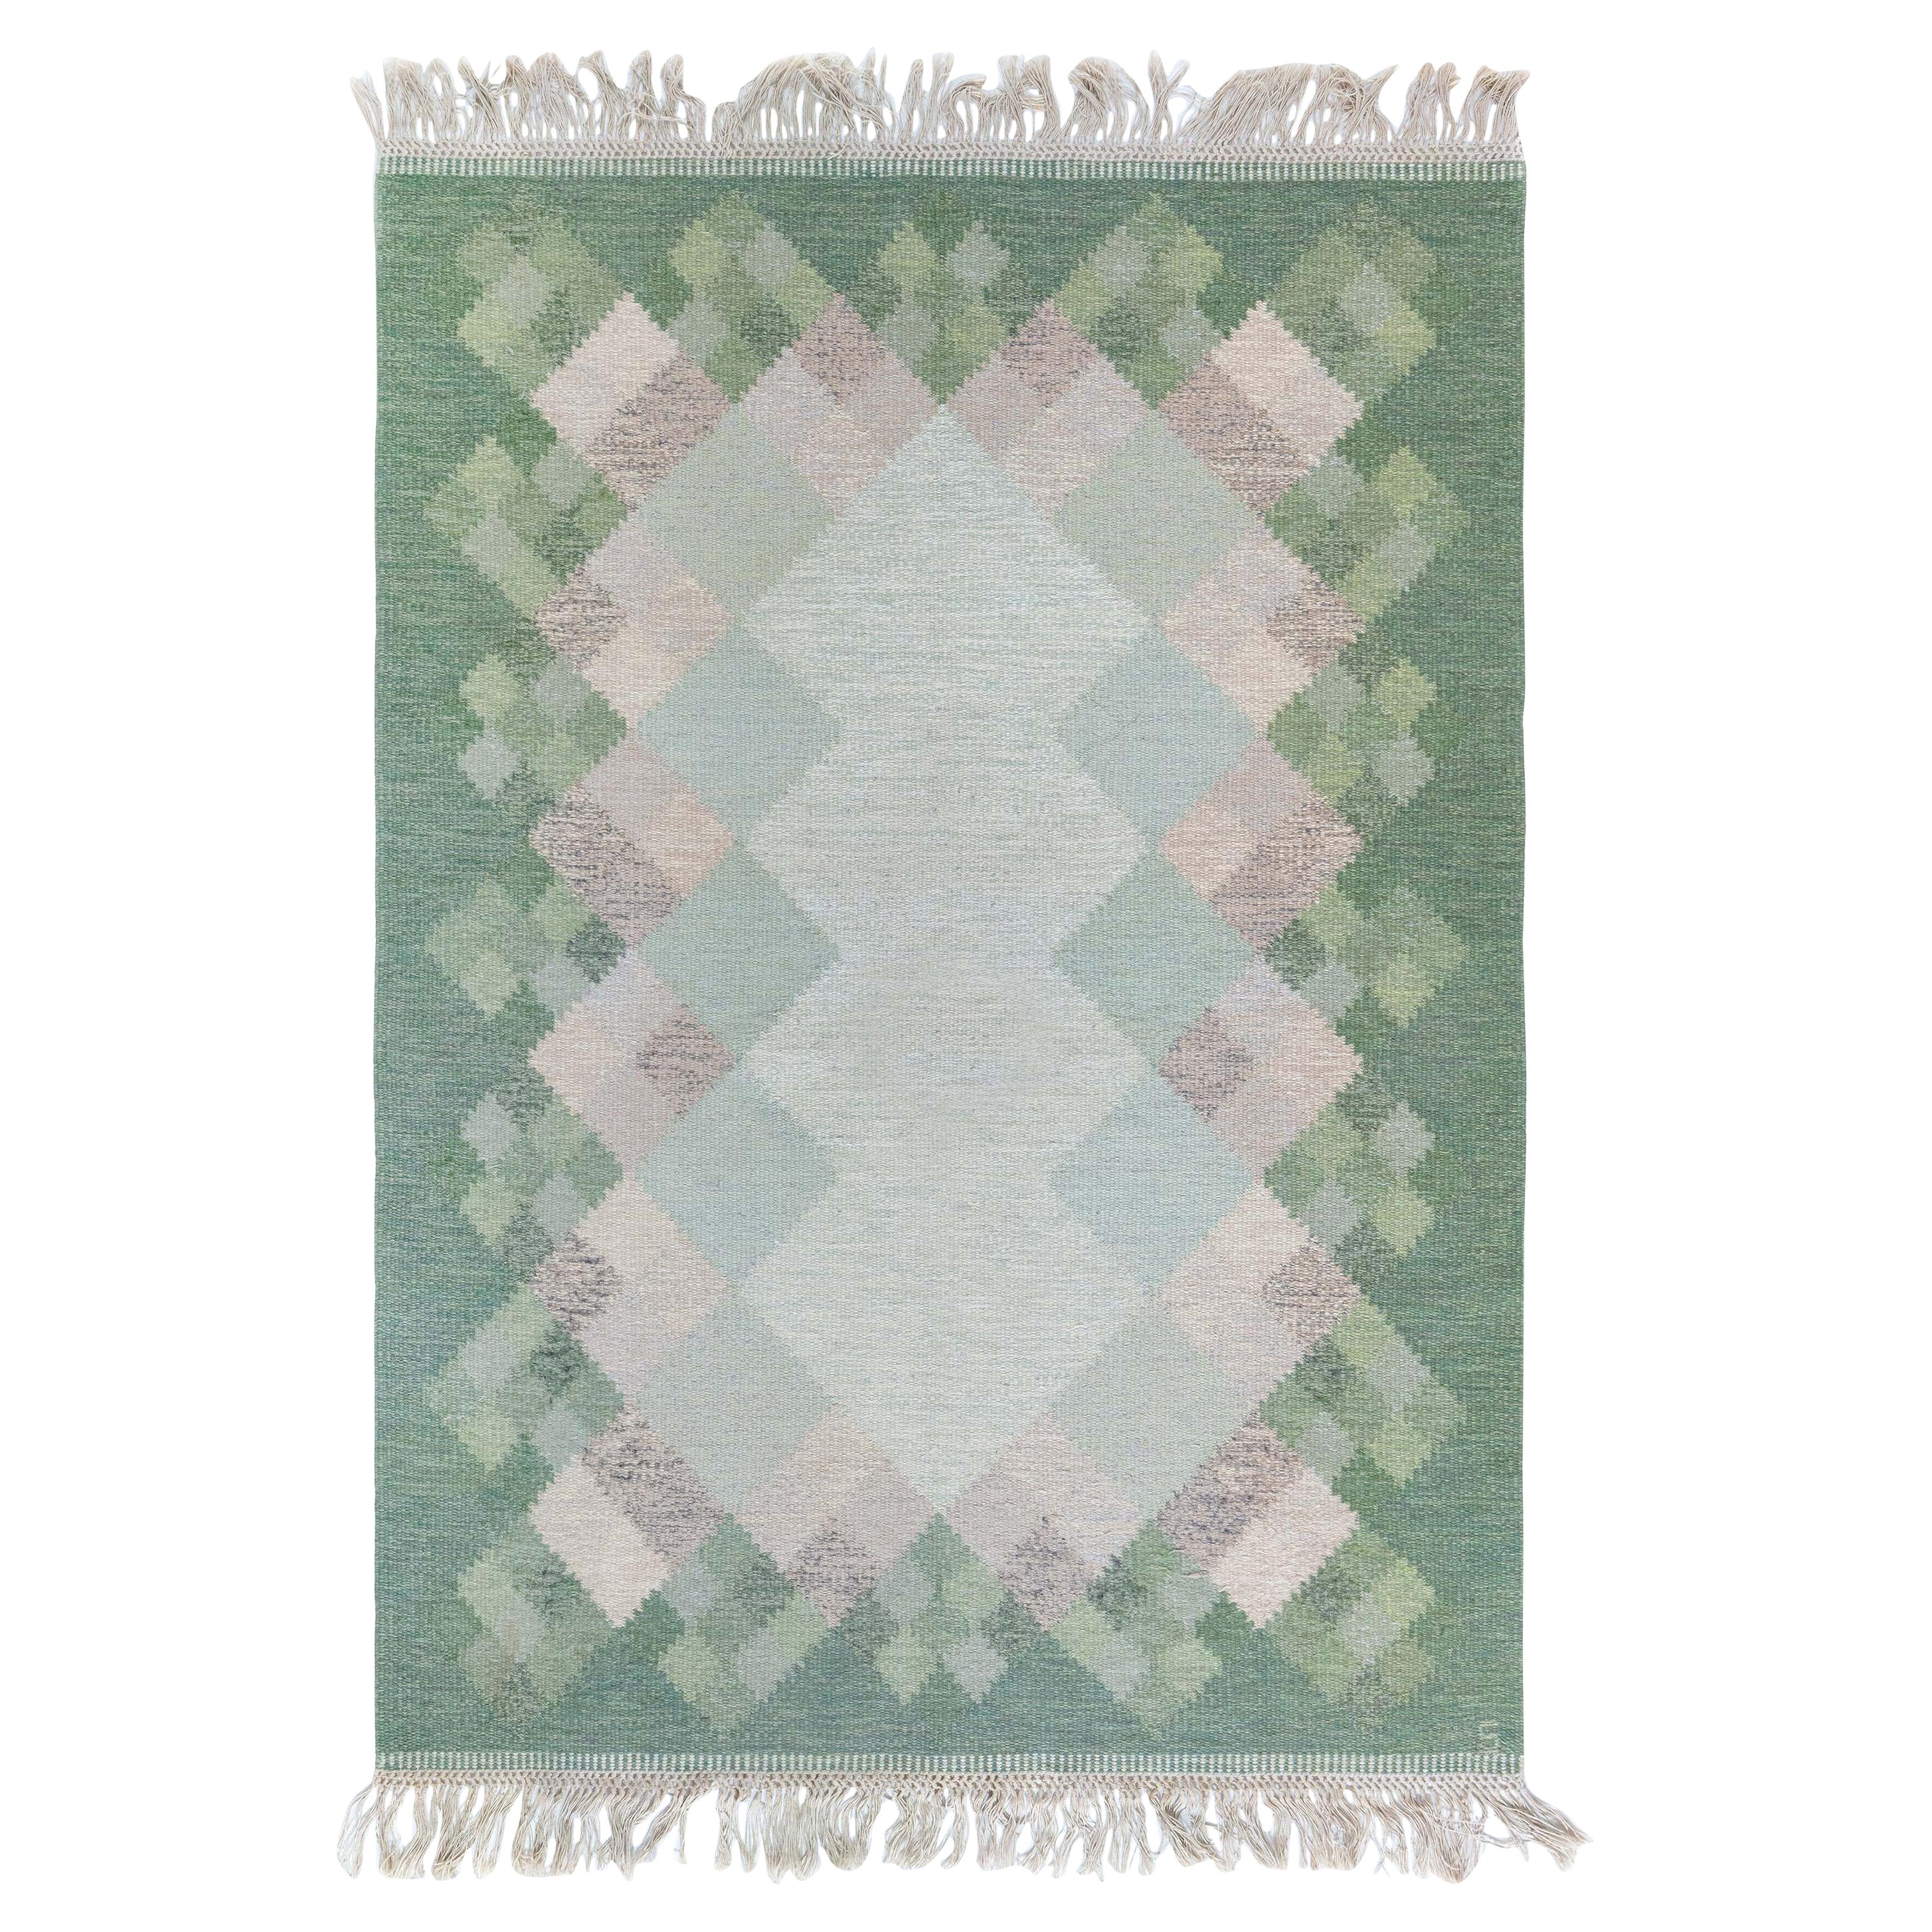 "Opal" - Mid-20th Century Swedish Flat Woven Rug by Brita Svefors For Sale